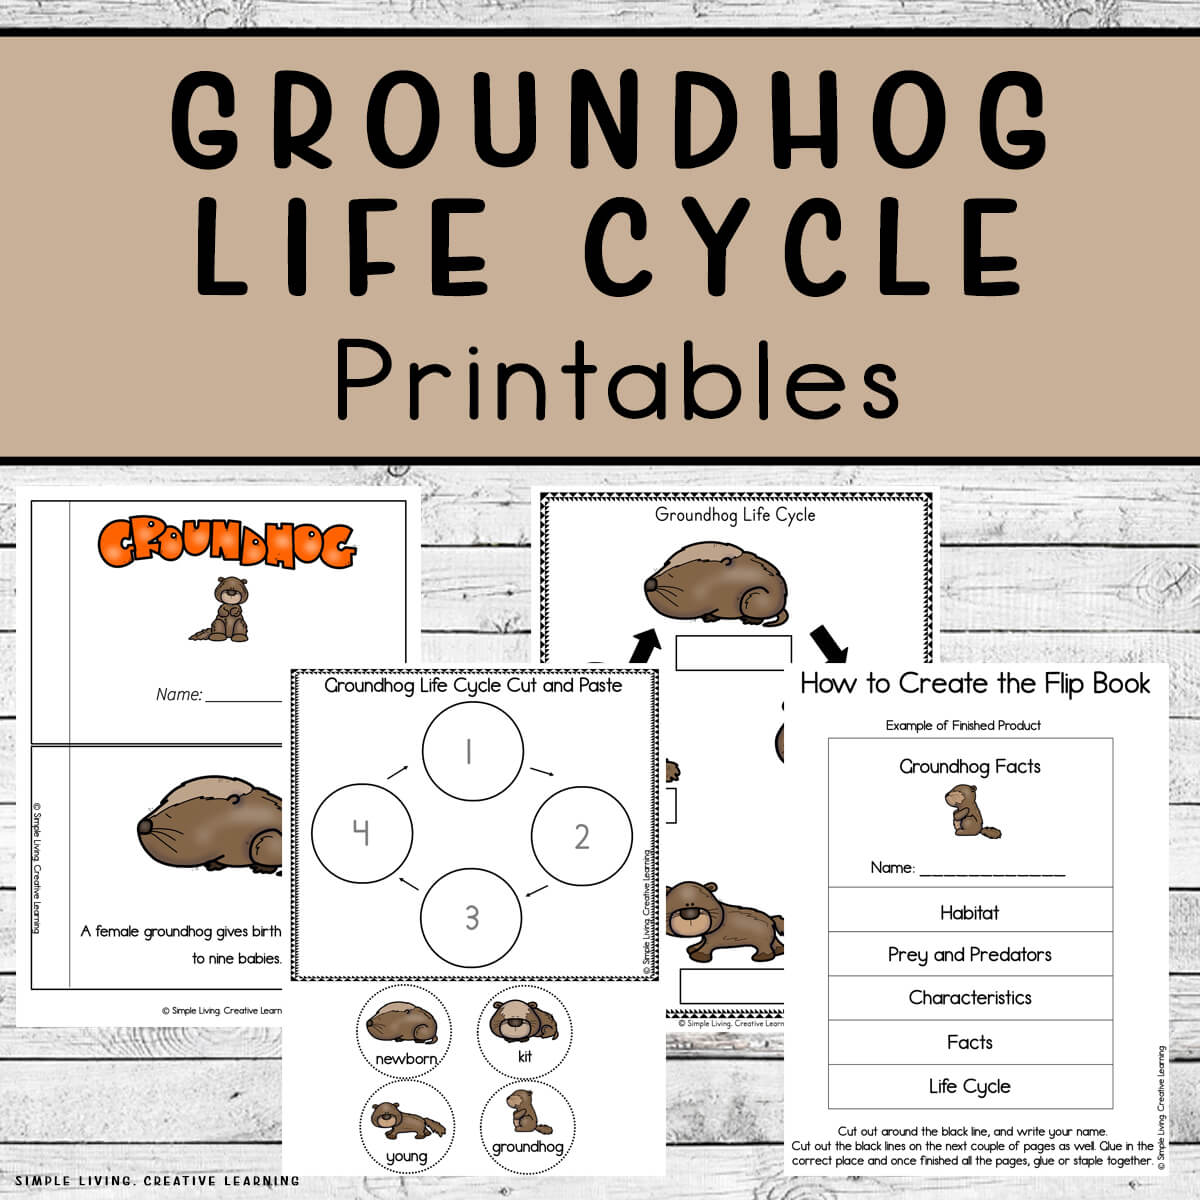 Groundhog Life Cycle Printables four pages